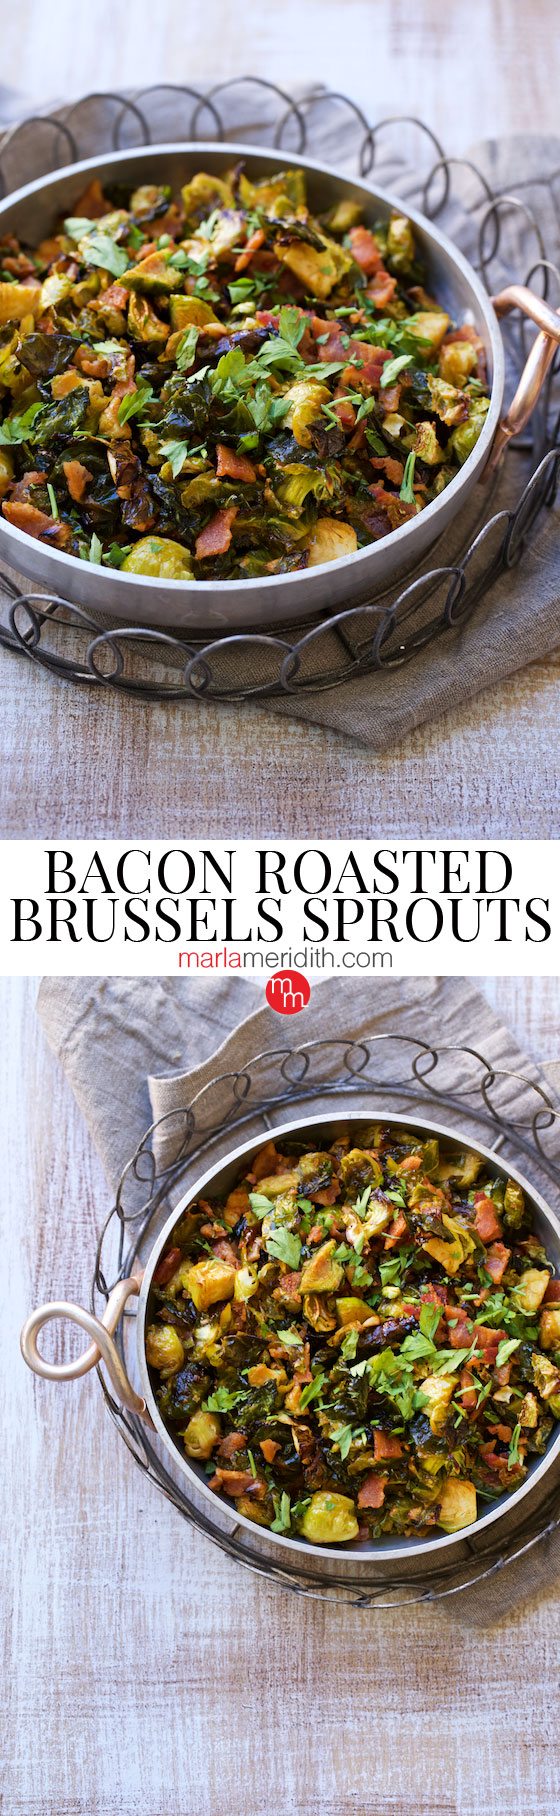 Bacon Roasted Brussels Sprouts, a sure hit at your holiday table! MarlaMeridith.com ( @marlameridith )